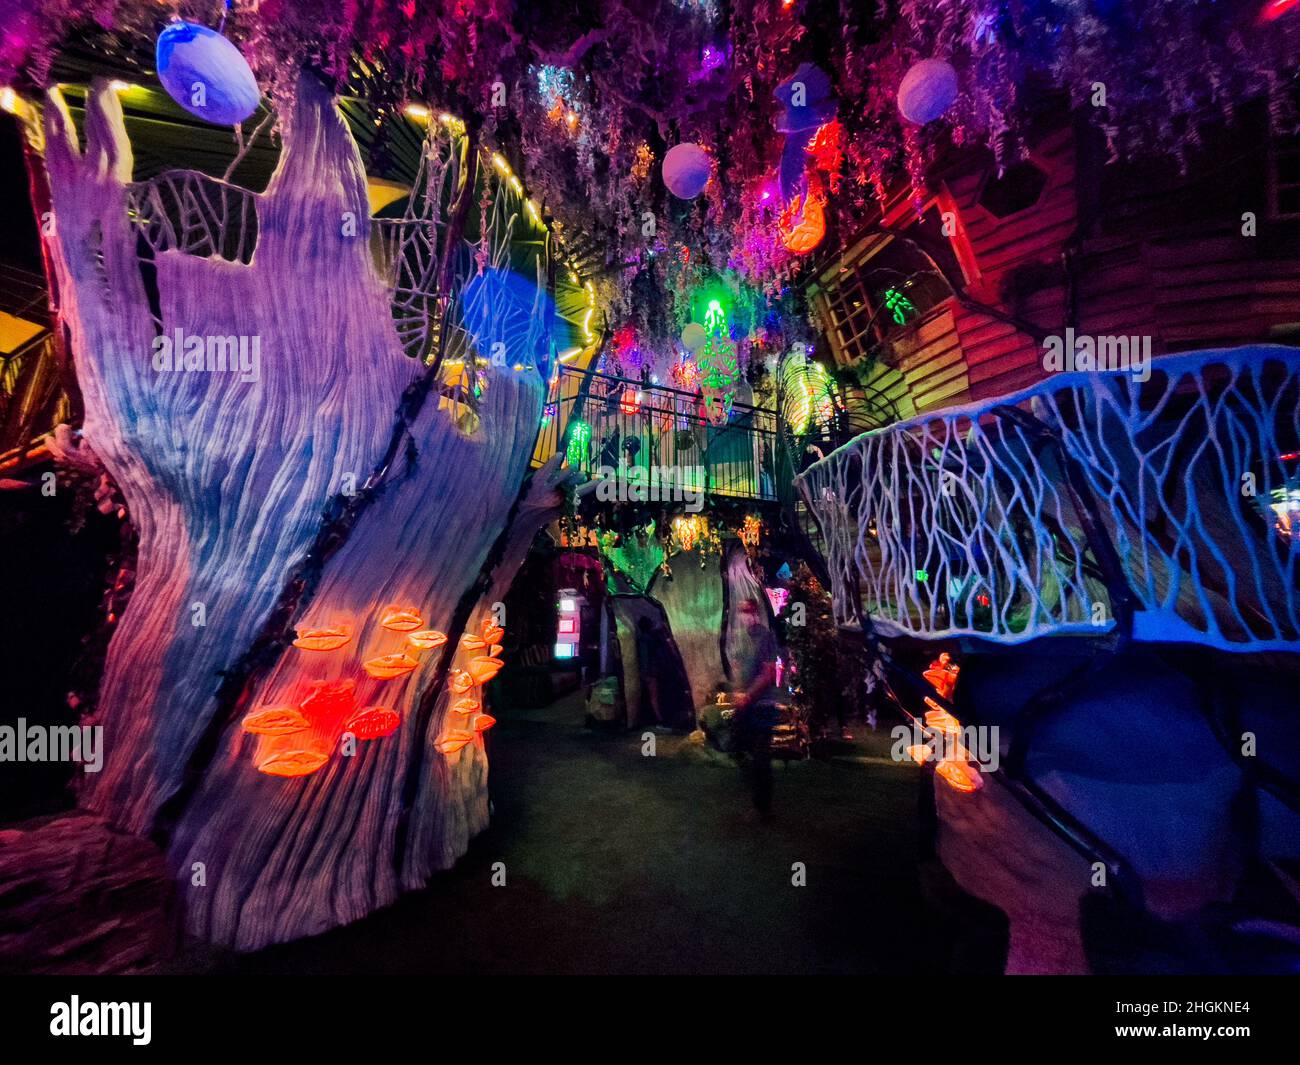 vibrant colors and patterns inside Meow Wolf, an immersive art experience in Santa Fe, New Mexico, USA Stock Photo